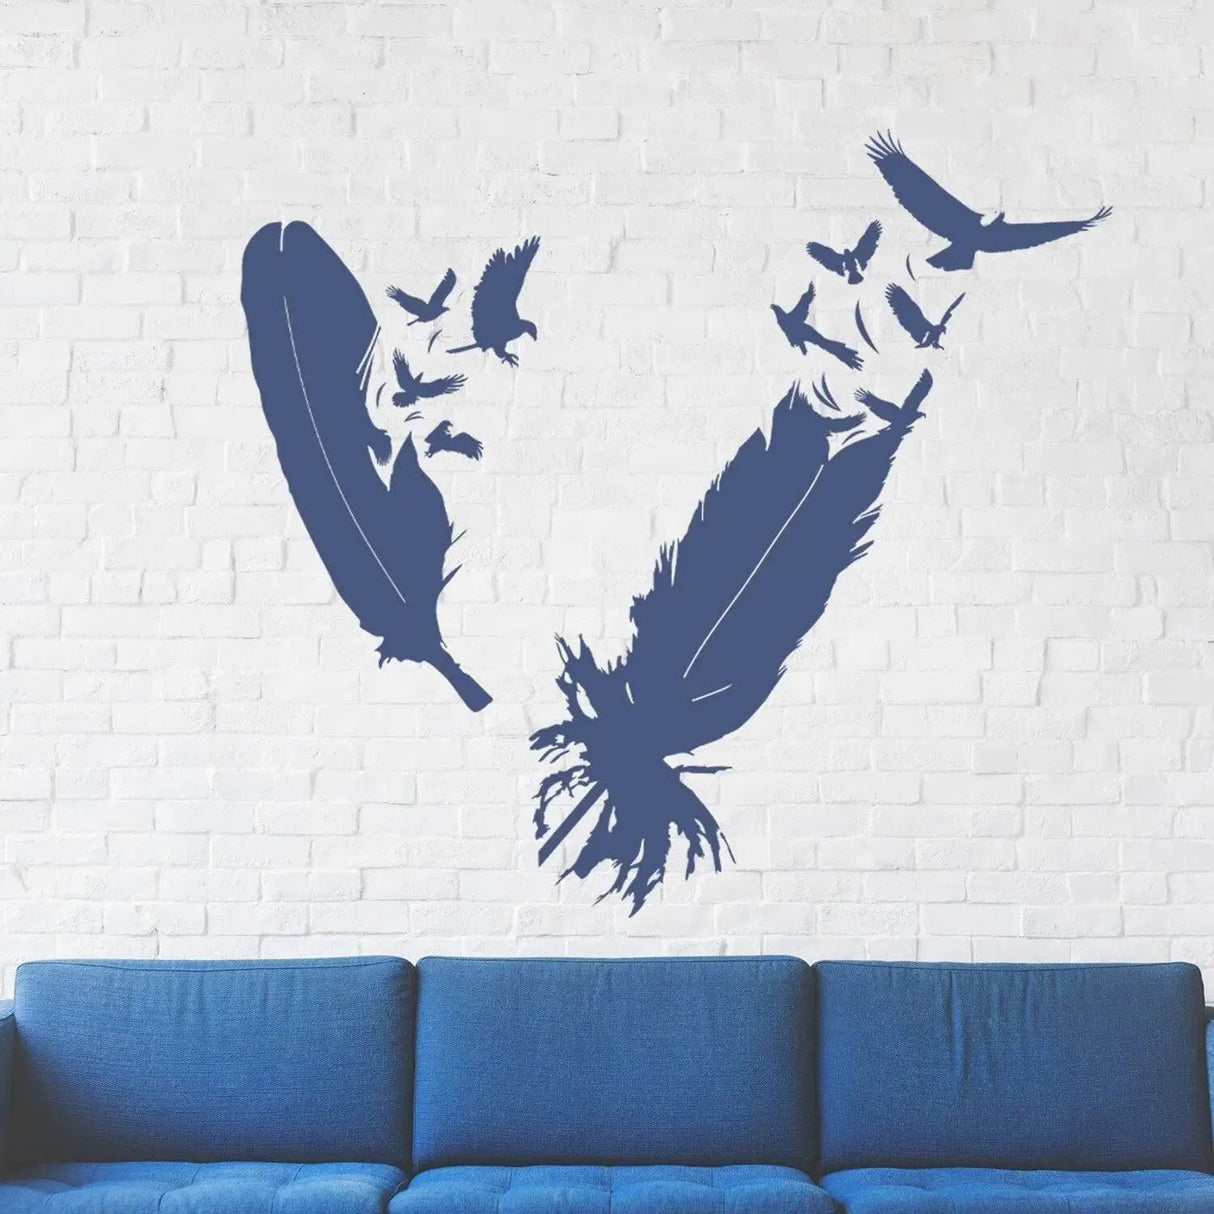 Bird Feather Wall Vinyl Sticker - Eagle Decor Flying Home Art Magic Nib Decal - Love Beautiful Above The Bed And Window Mural - Decords